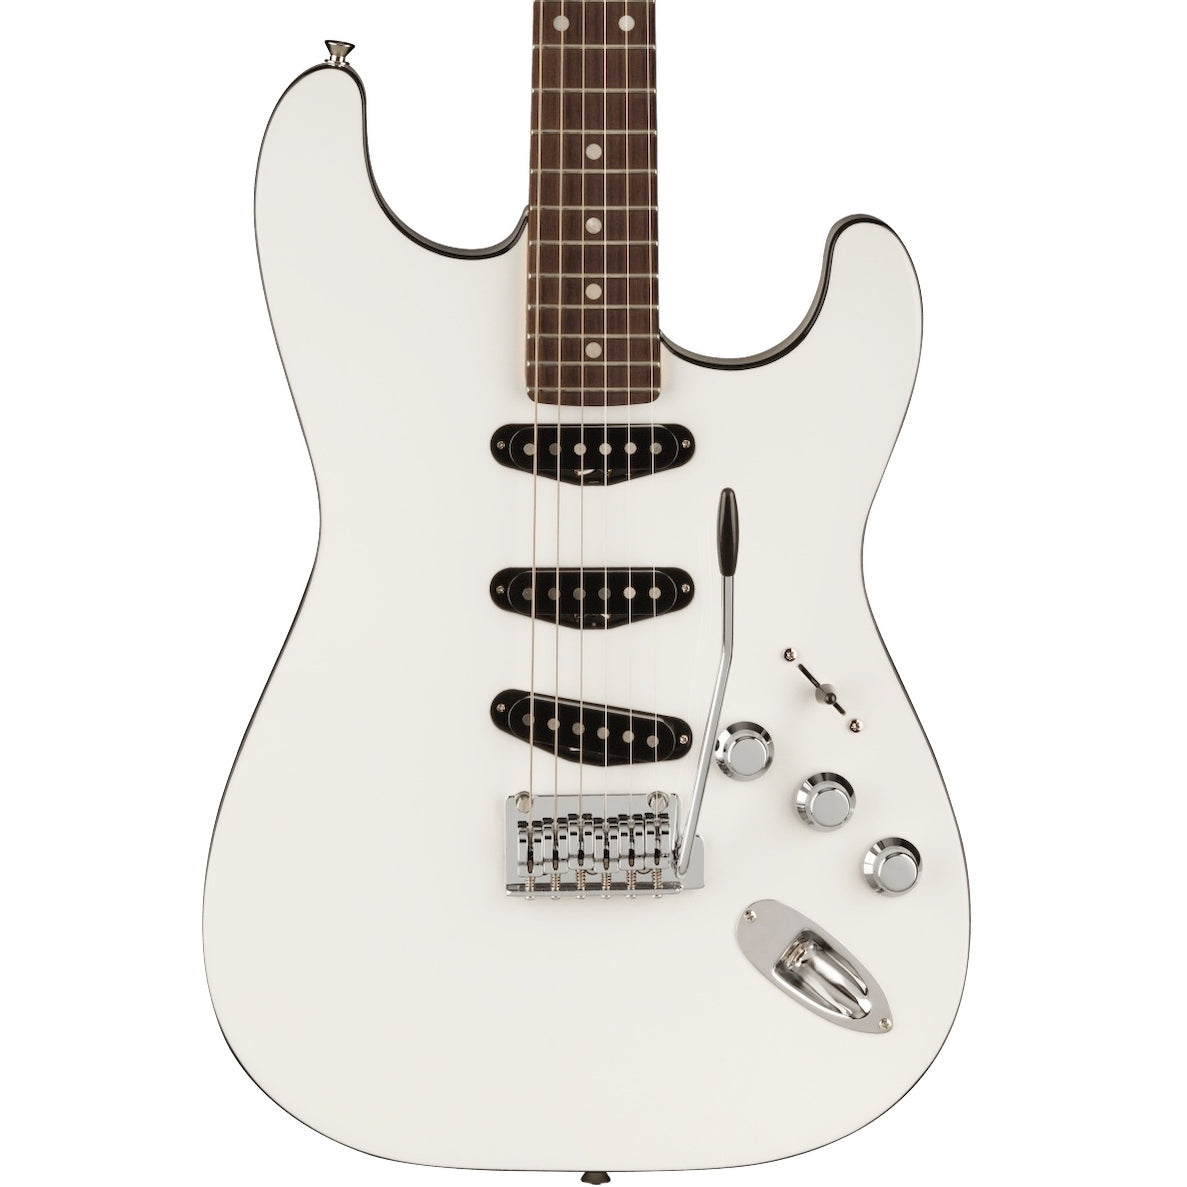 Fender Aerodyne Special Stratocaster Bright White | Music Experience | Shop Online | South Africa